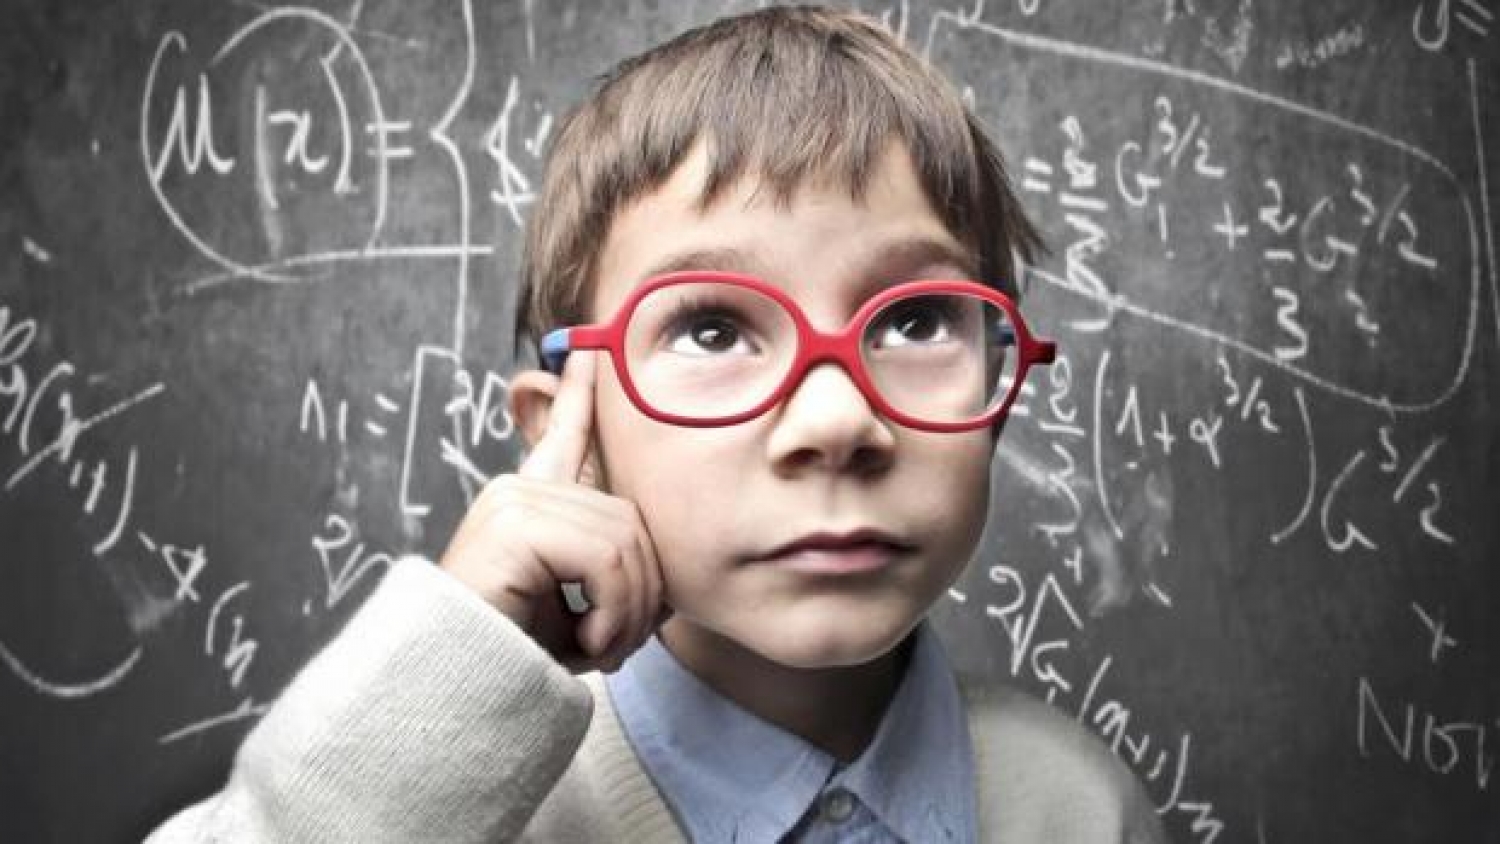 Opticians warn: children are increasingly myopic and at an earlier age